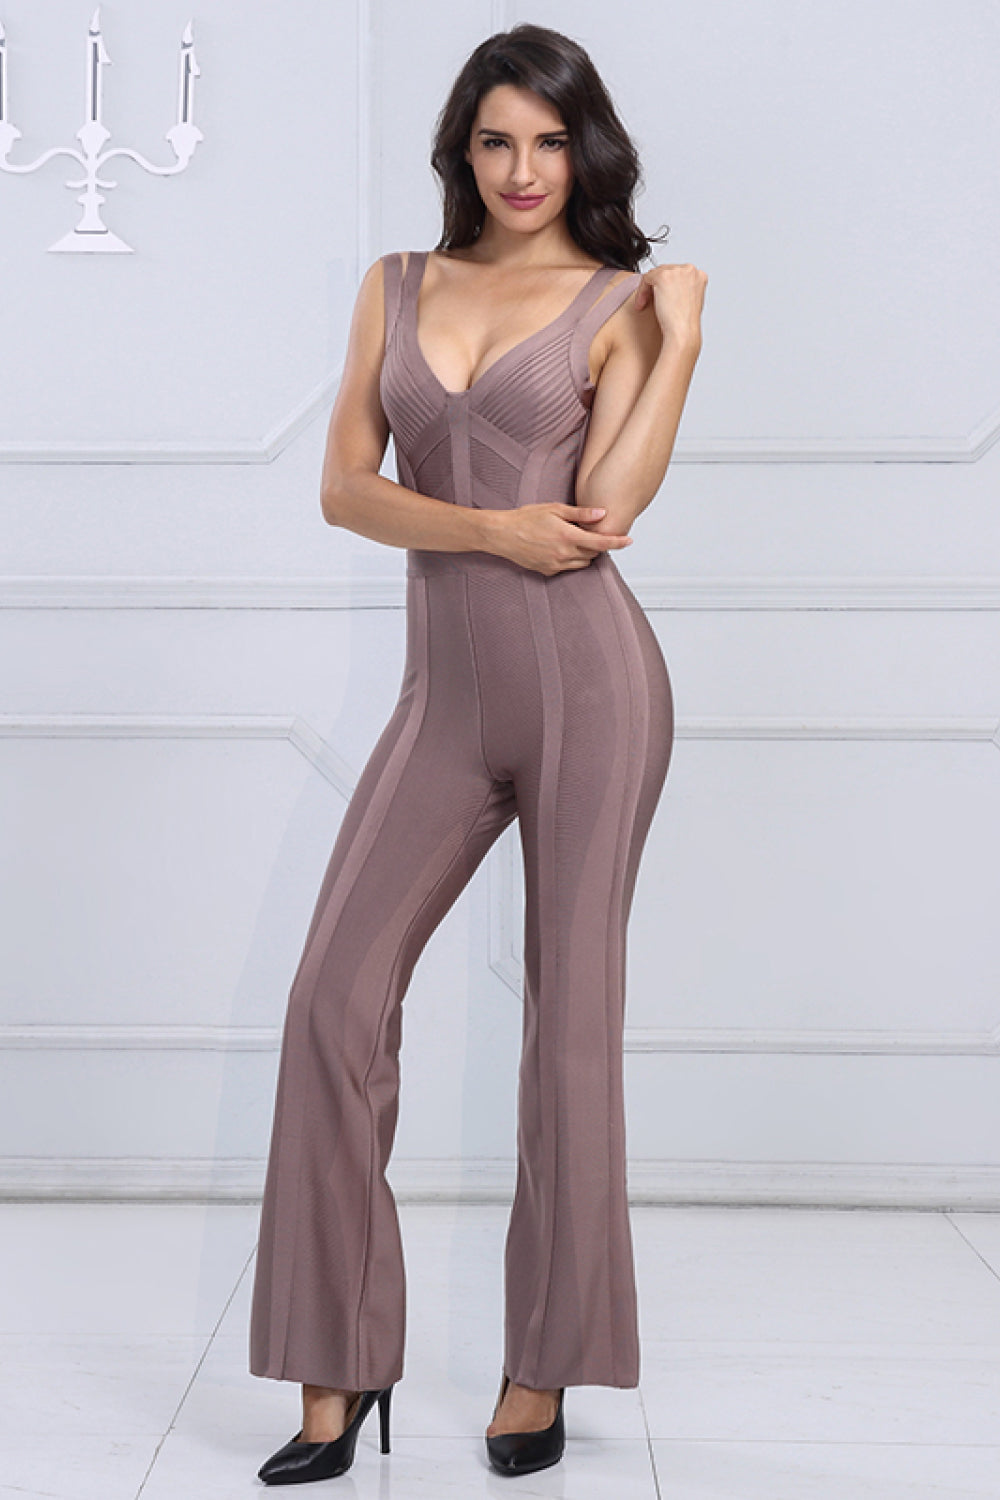 Solid Color Sleeveless Backless Jumpsuit